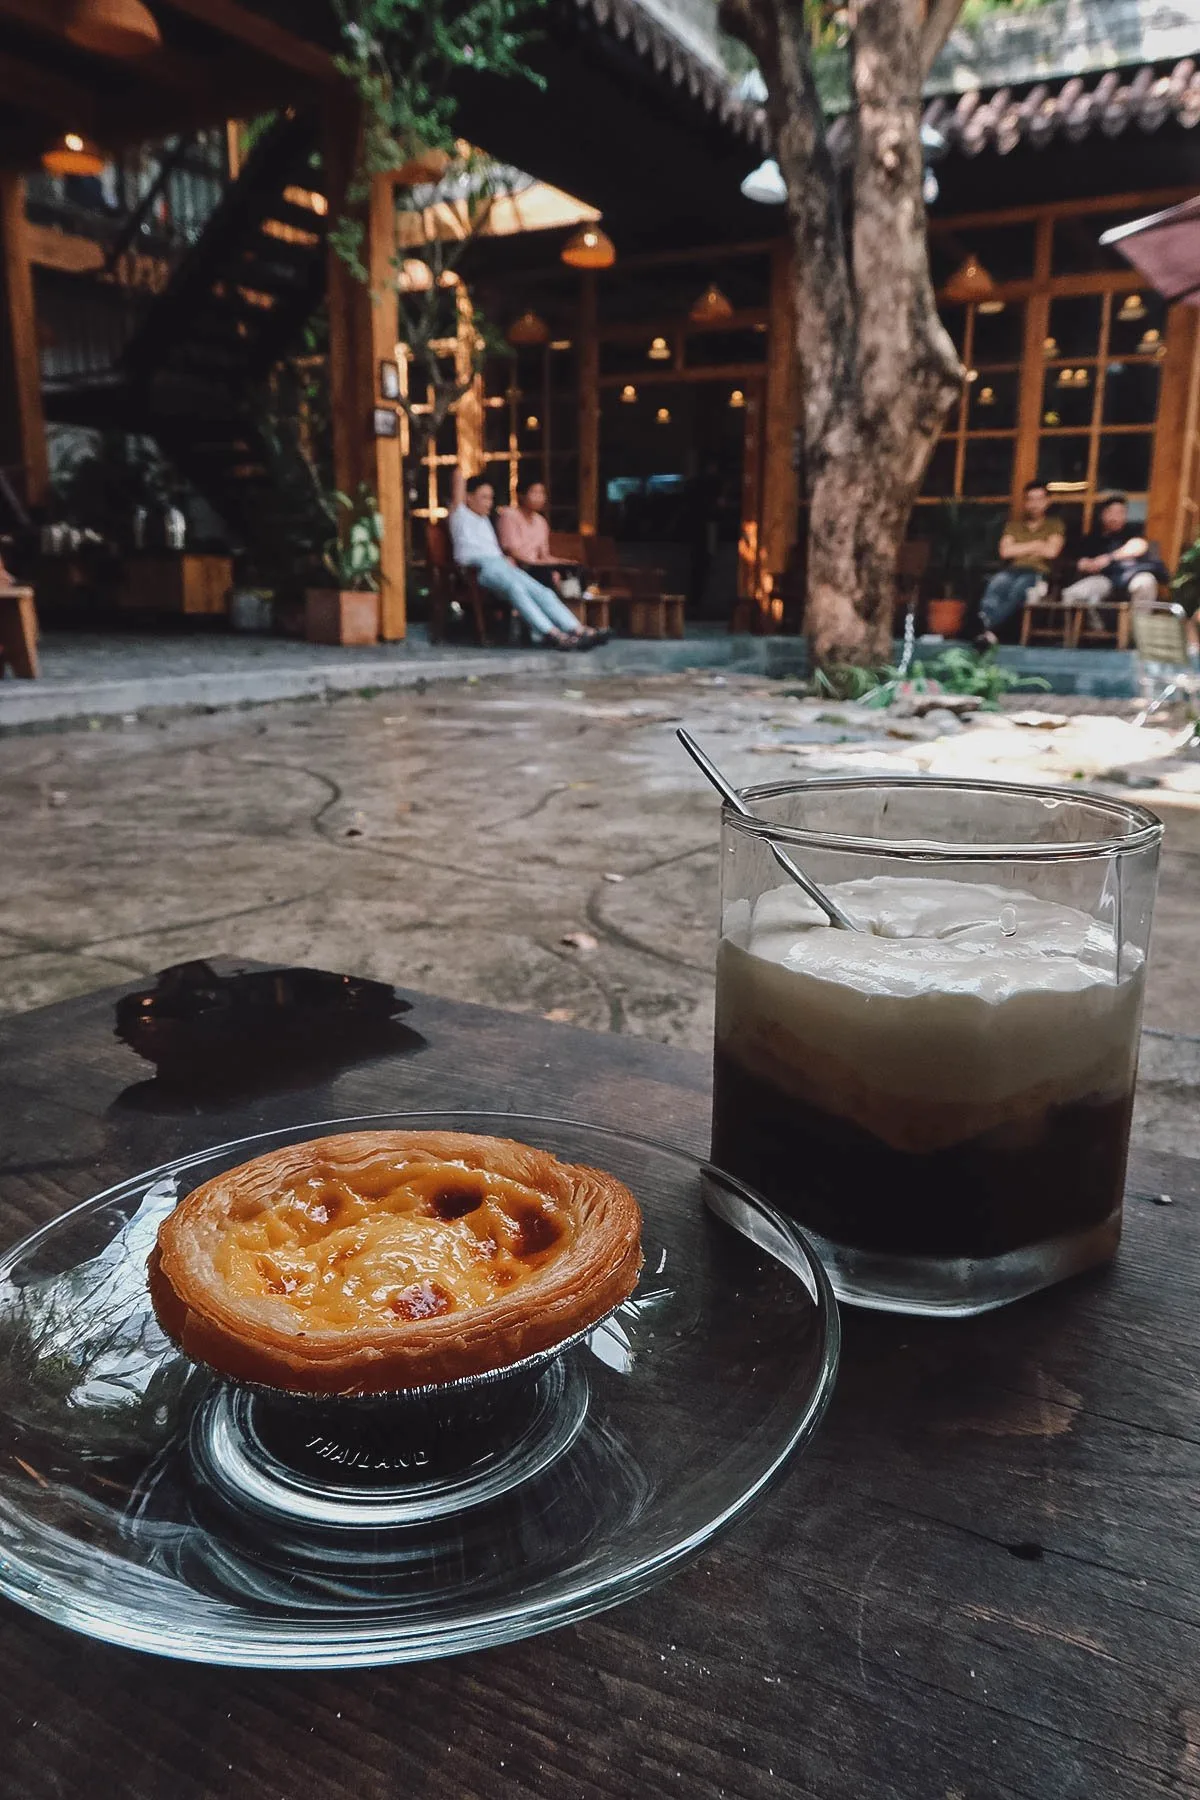 Salt coffee and a pastry at a cafe in Danang, Vietnam